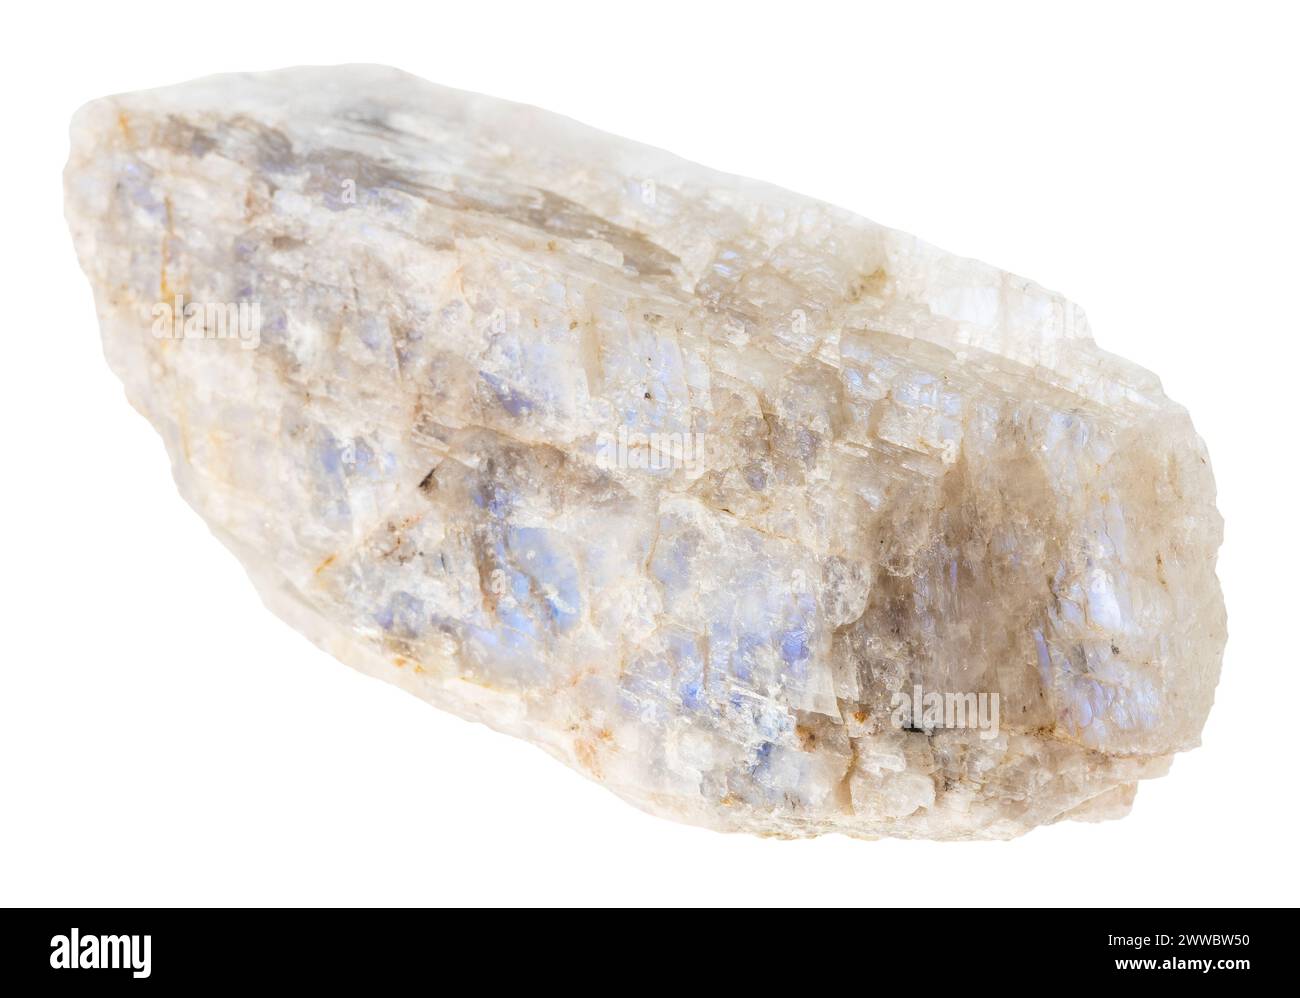 close up of sample of natural stone from geological collection - unpolished belomorite moonstone rock isolated on white background from North Karelia Stock Photo